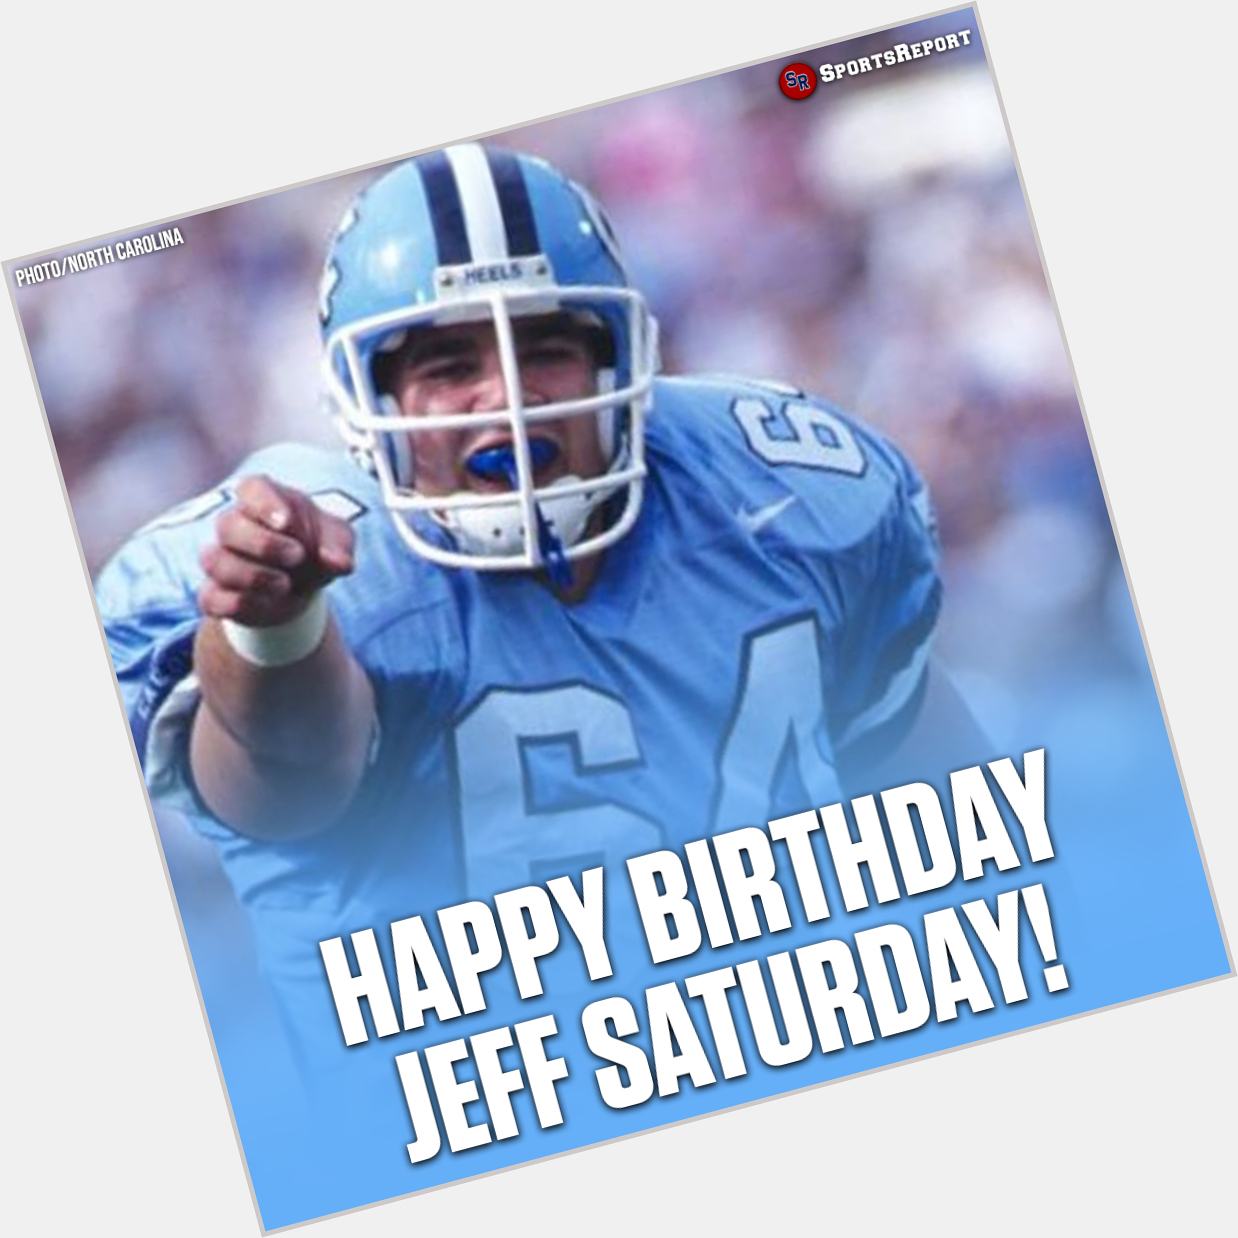  Fans, let\s wish great Jeff Saturday a Happy Birthday! 